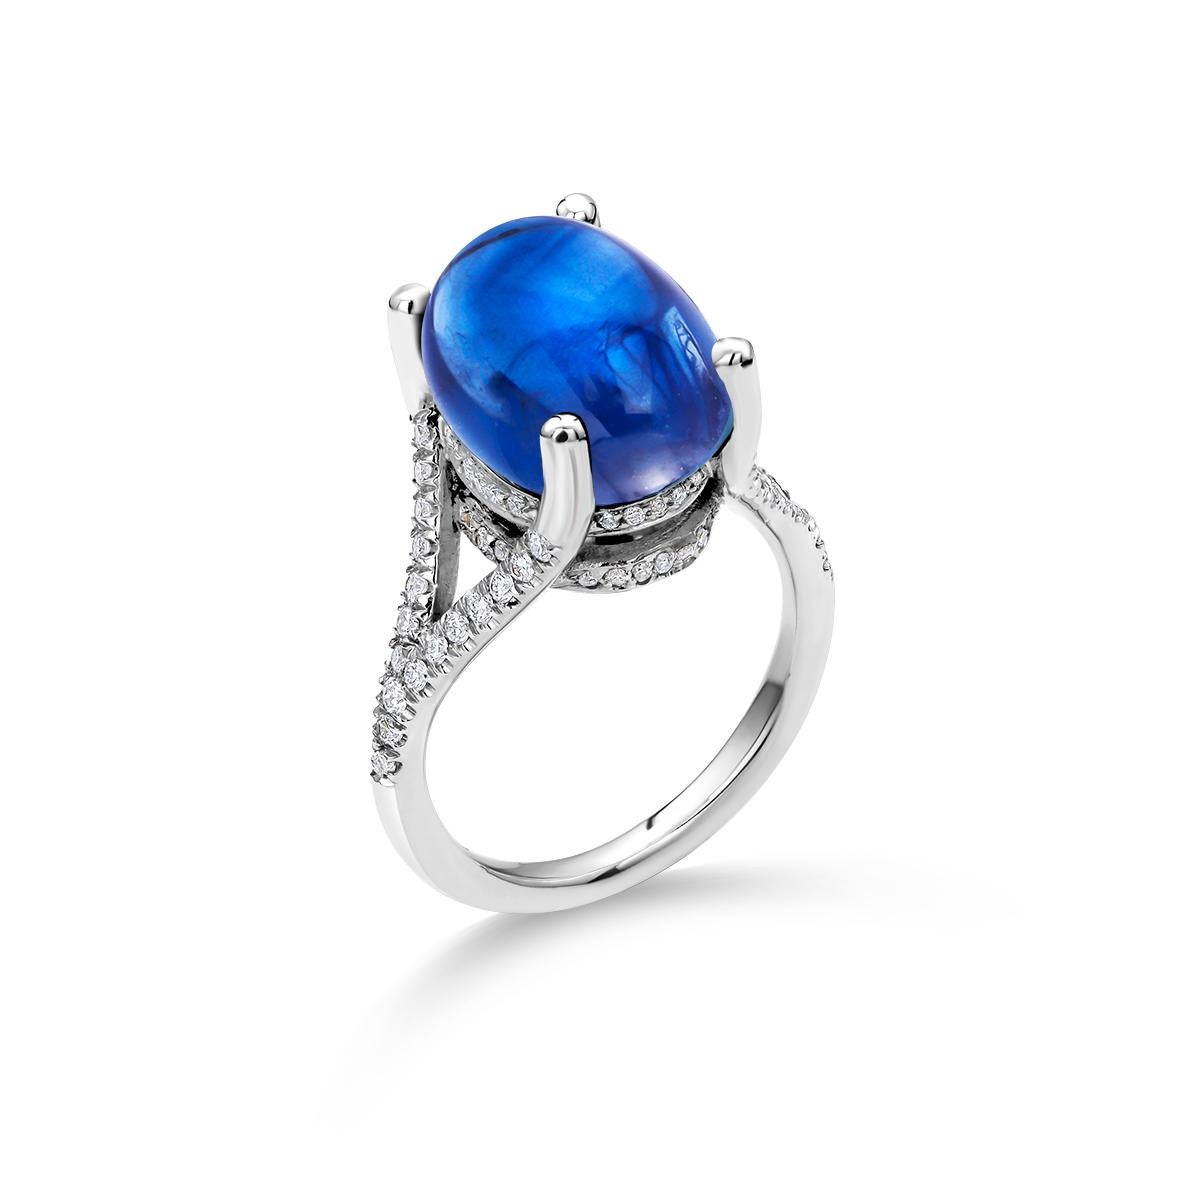 Women's Ceylon Cabochon Sapphire Diamond Gold Cocktail Ring Weighing 17.77 Carats